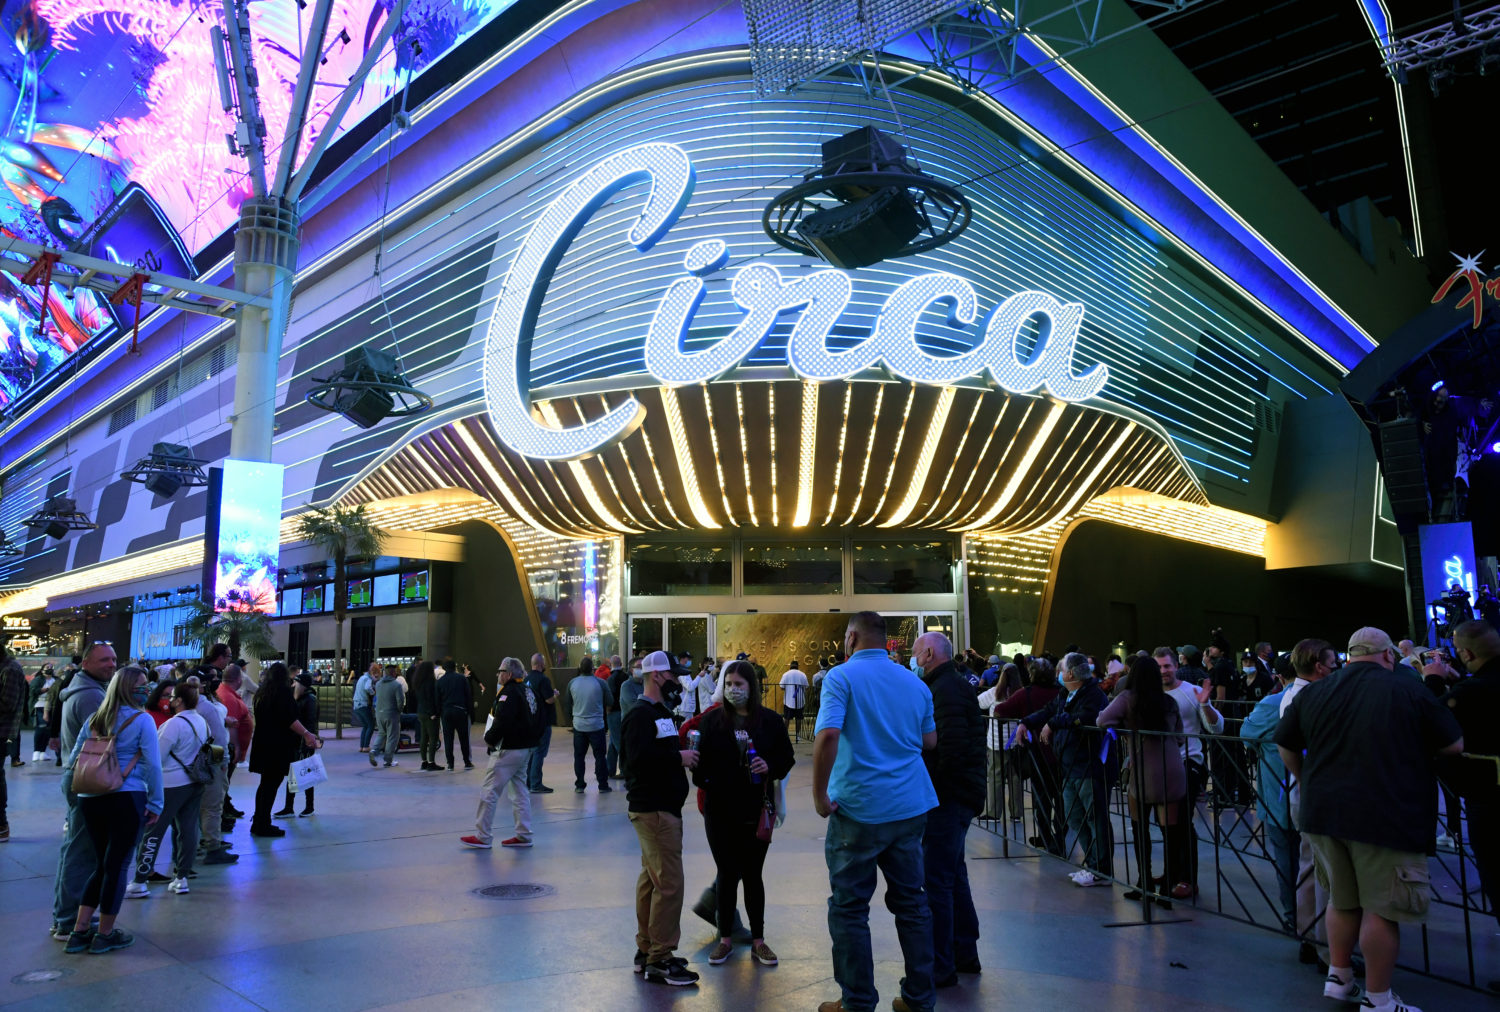 Casino Entertainment Shows Return in Las Vegas and Southern California